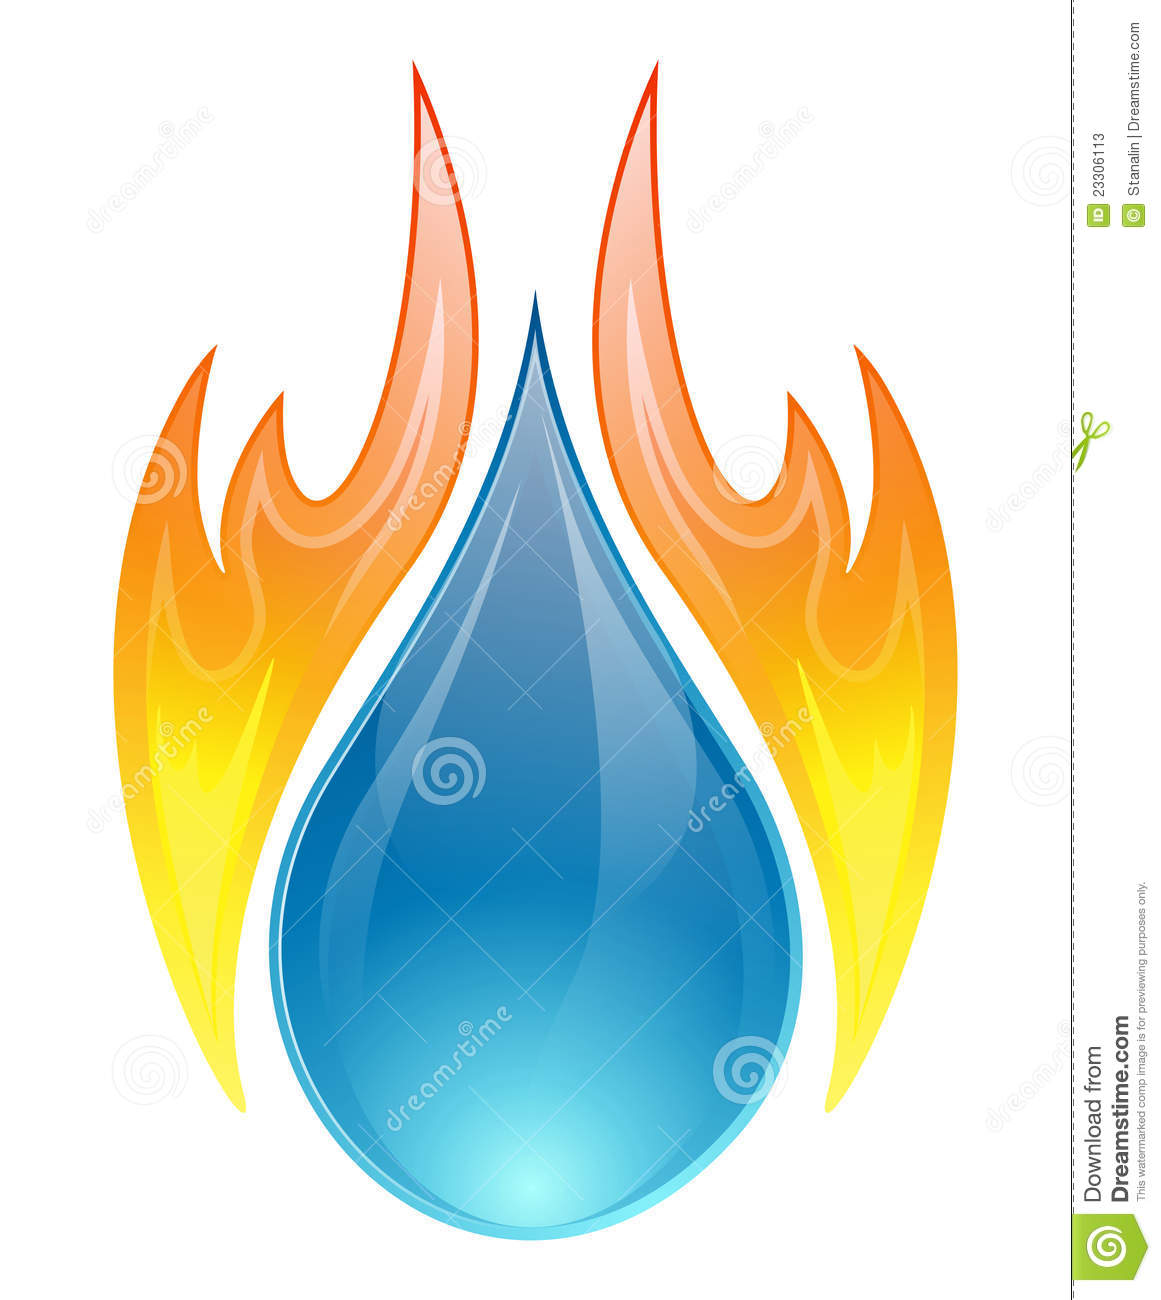 Illustration Of Two Elements Water And Fire On A White Background